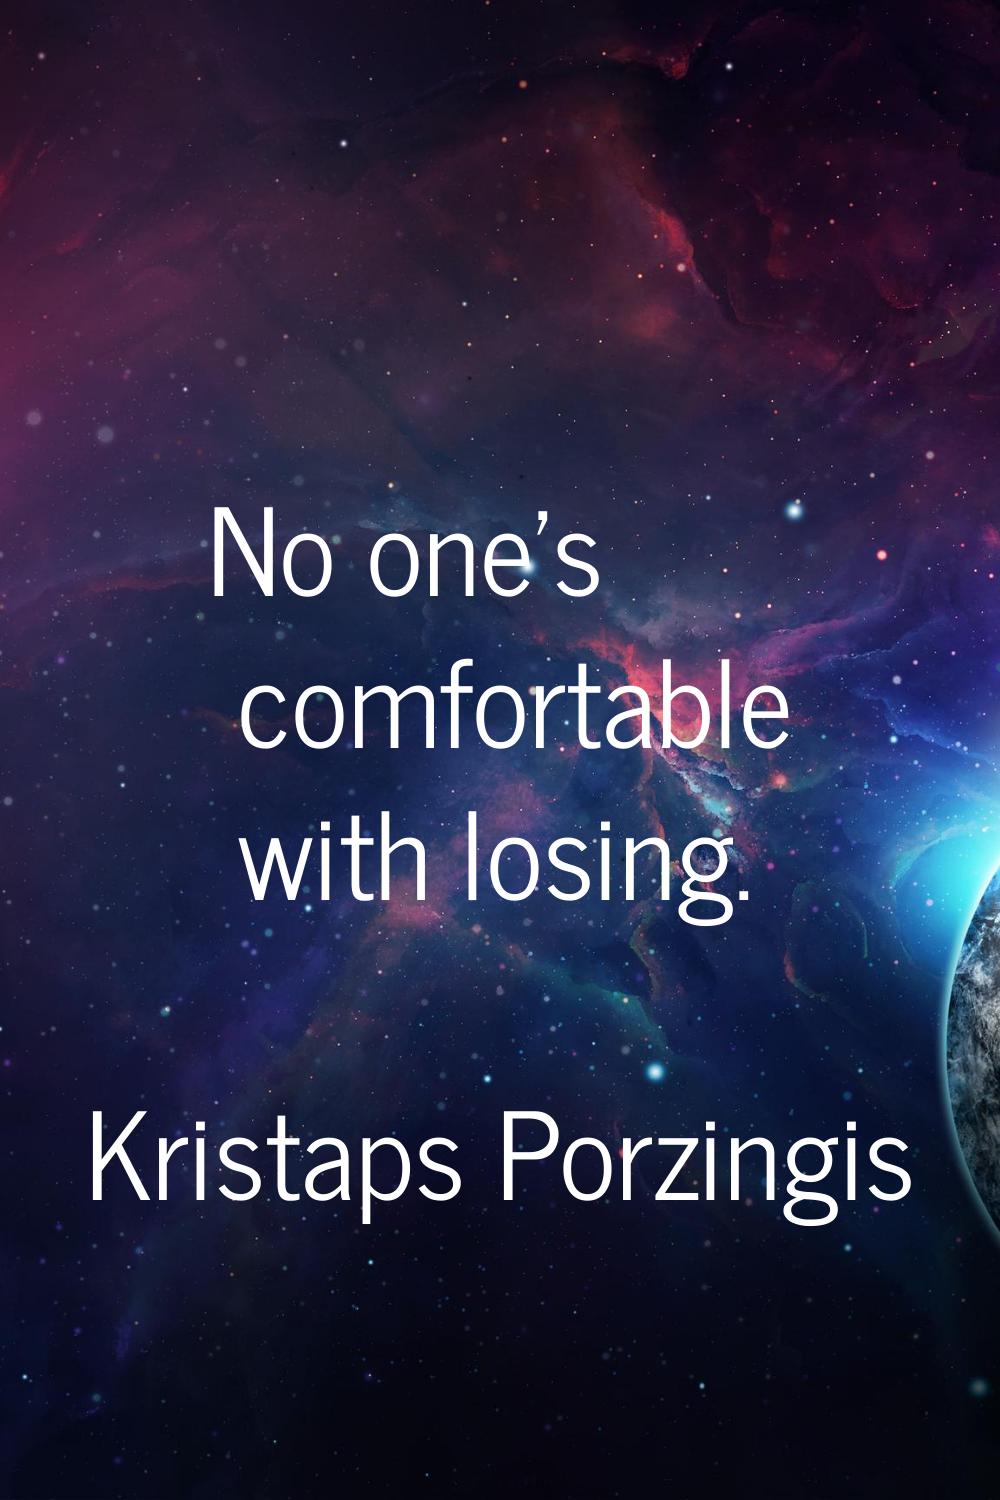 No one's comfortable with losing.